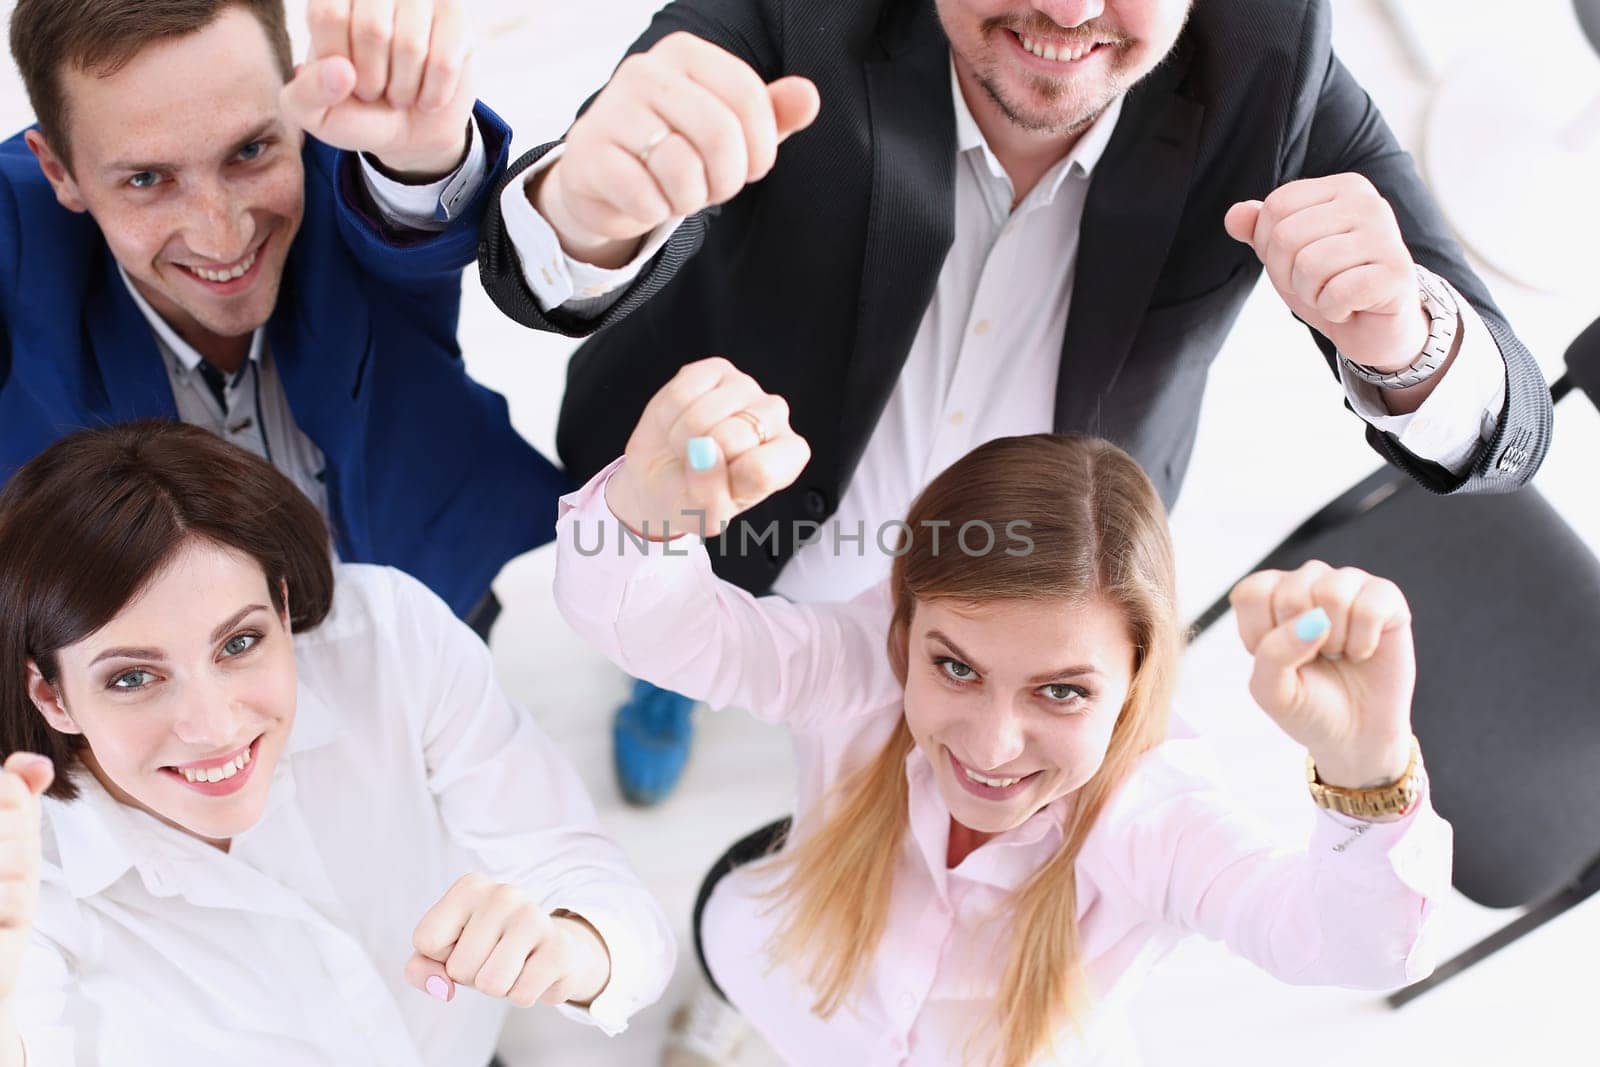 Group of joyful happy people in suits celebrate win with arms up. White collar leadership sale result feel fun good news profit bargain initiative achievement corporate life style deal concept